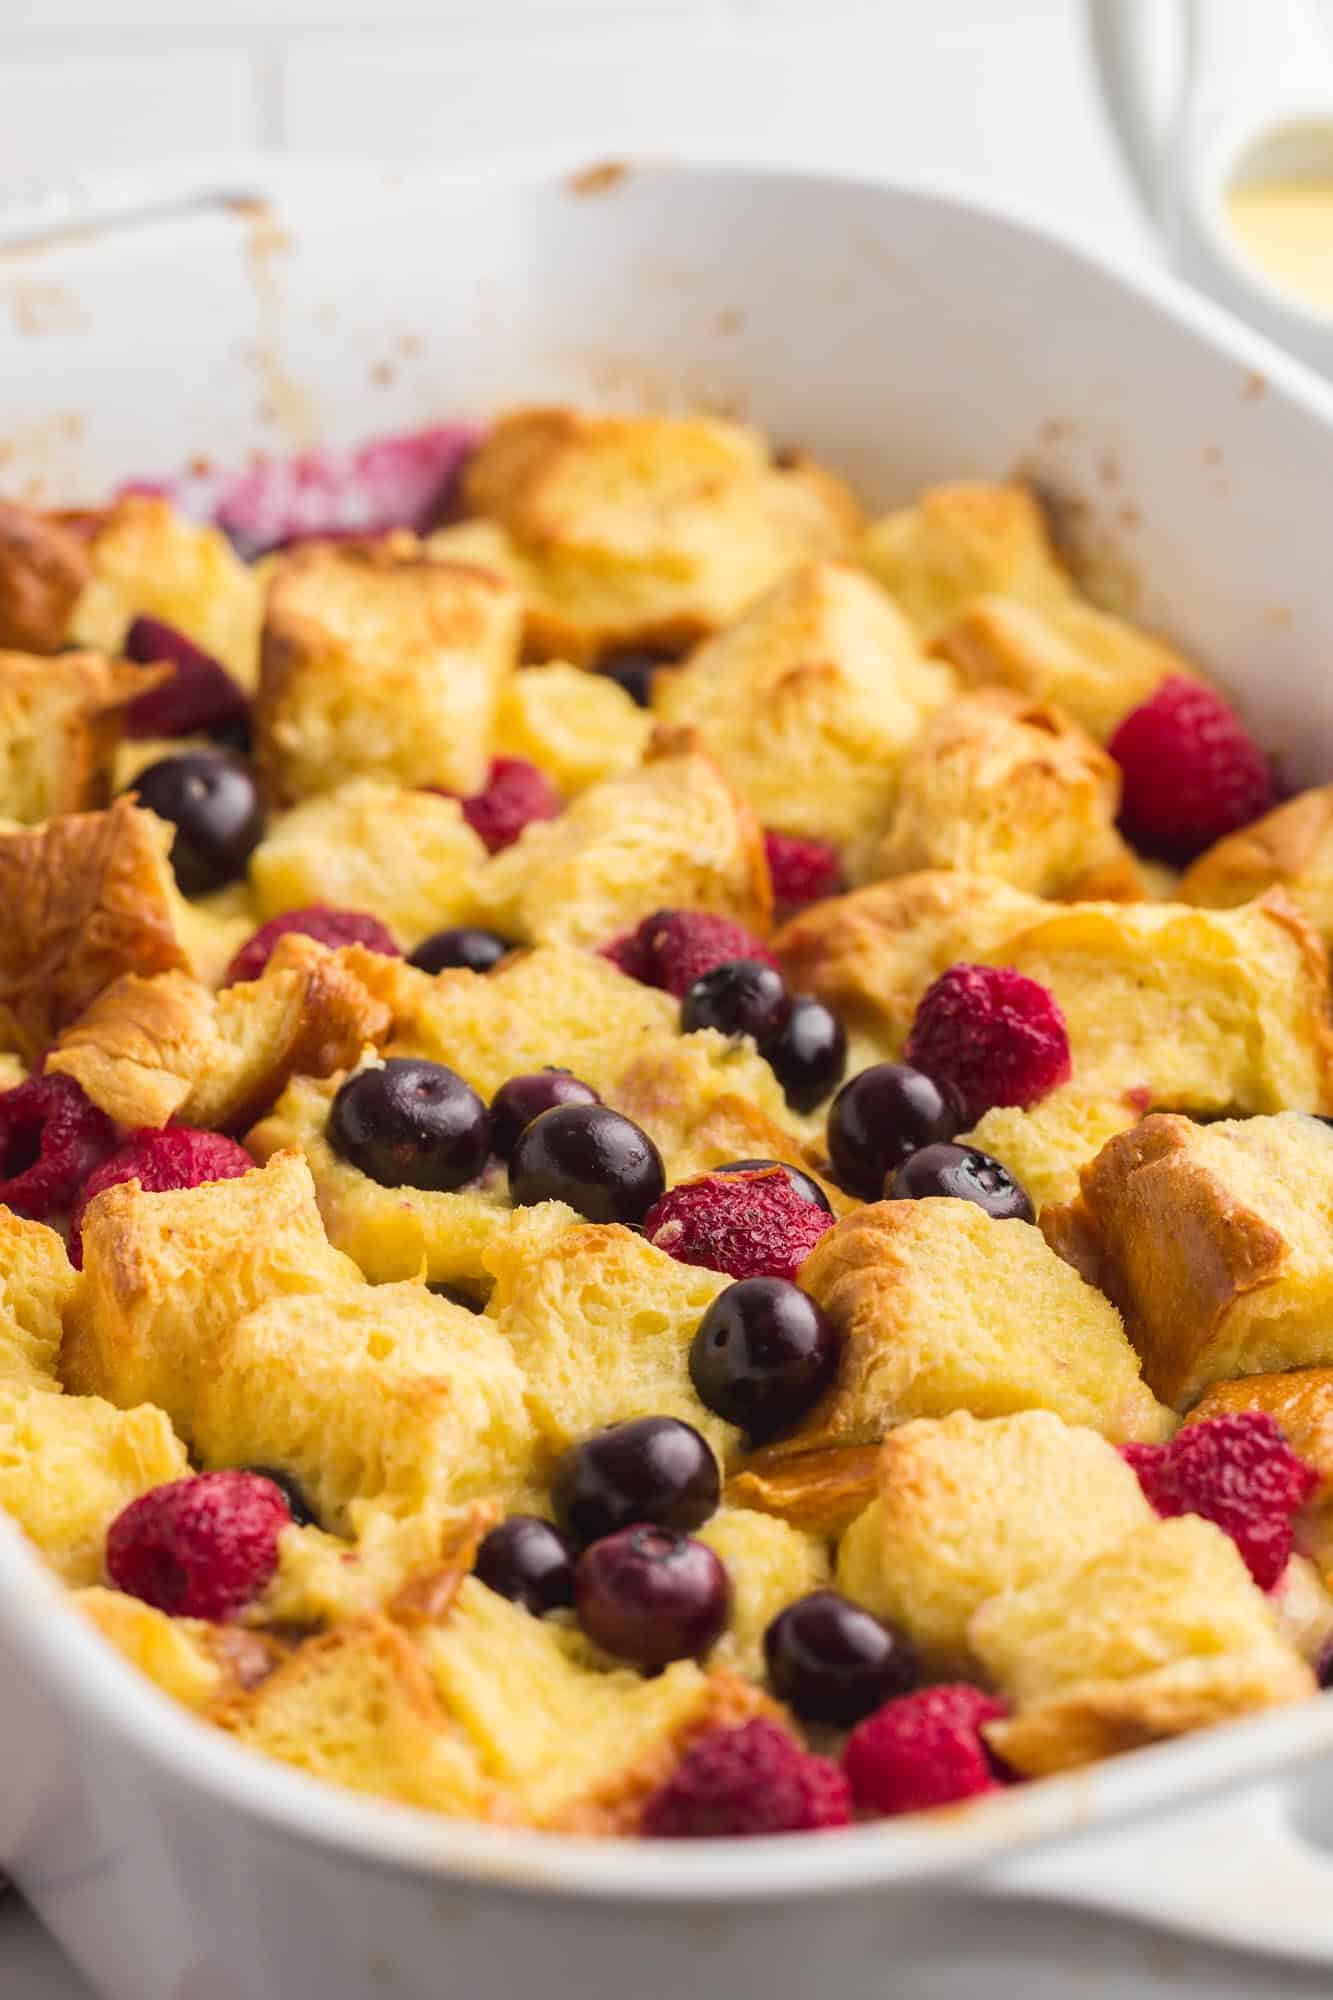 Close up shot of baked bread pudding with fresh berries